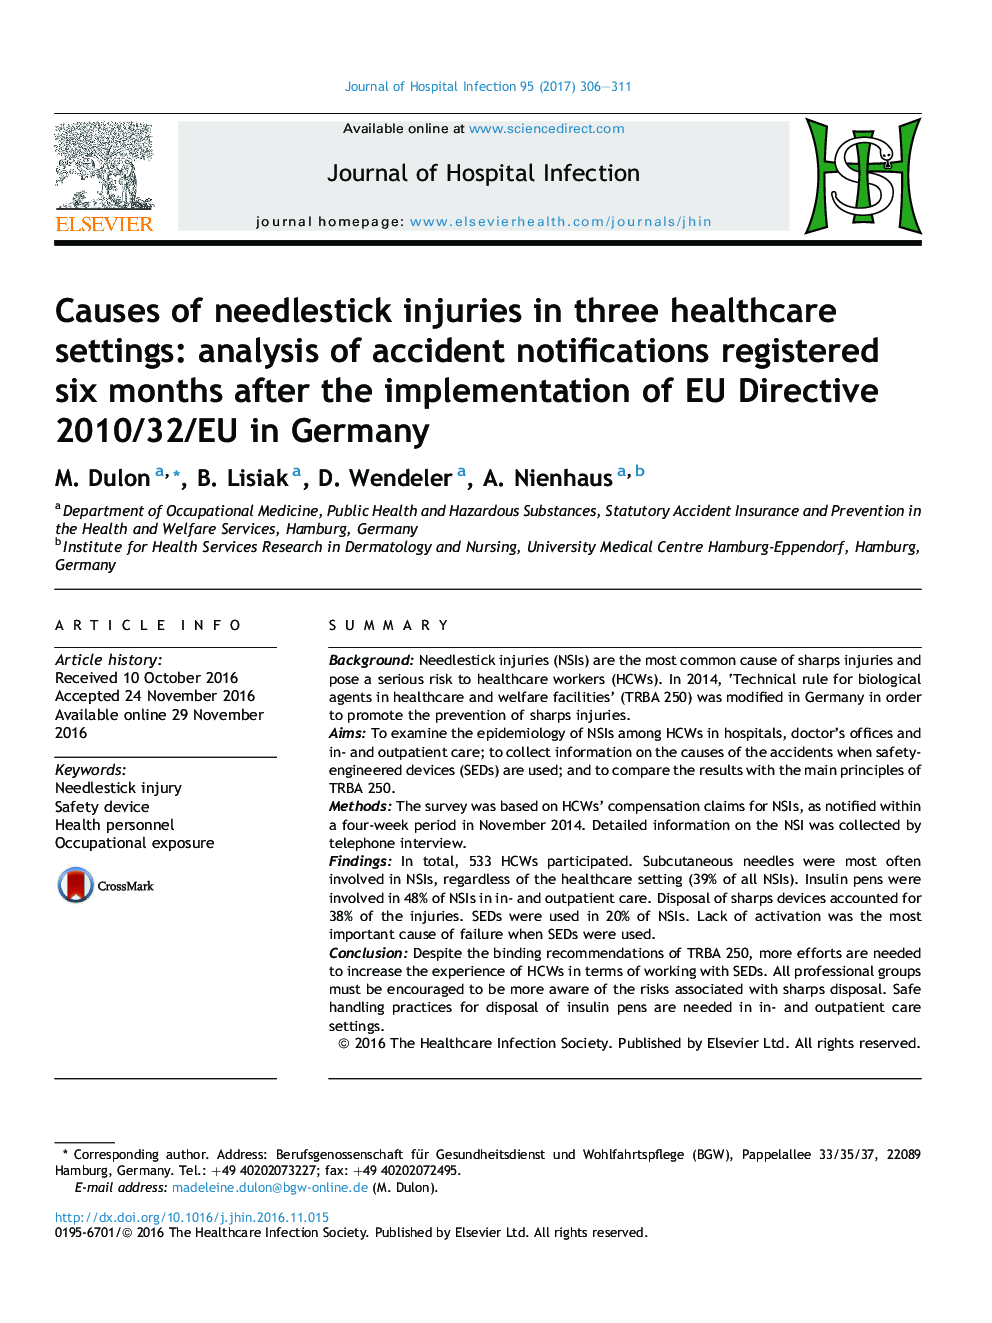 Causes of needlestick injuries in three healthcare settings: analysis of accident notifications registered six months after the implementation of EU Directive 2010/32/EU in Germany